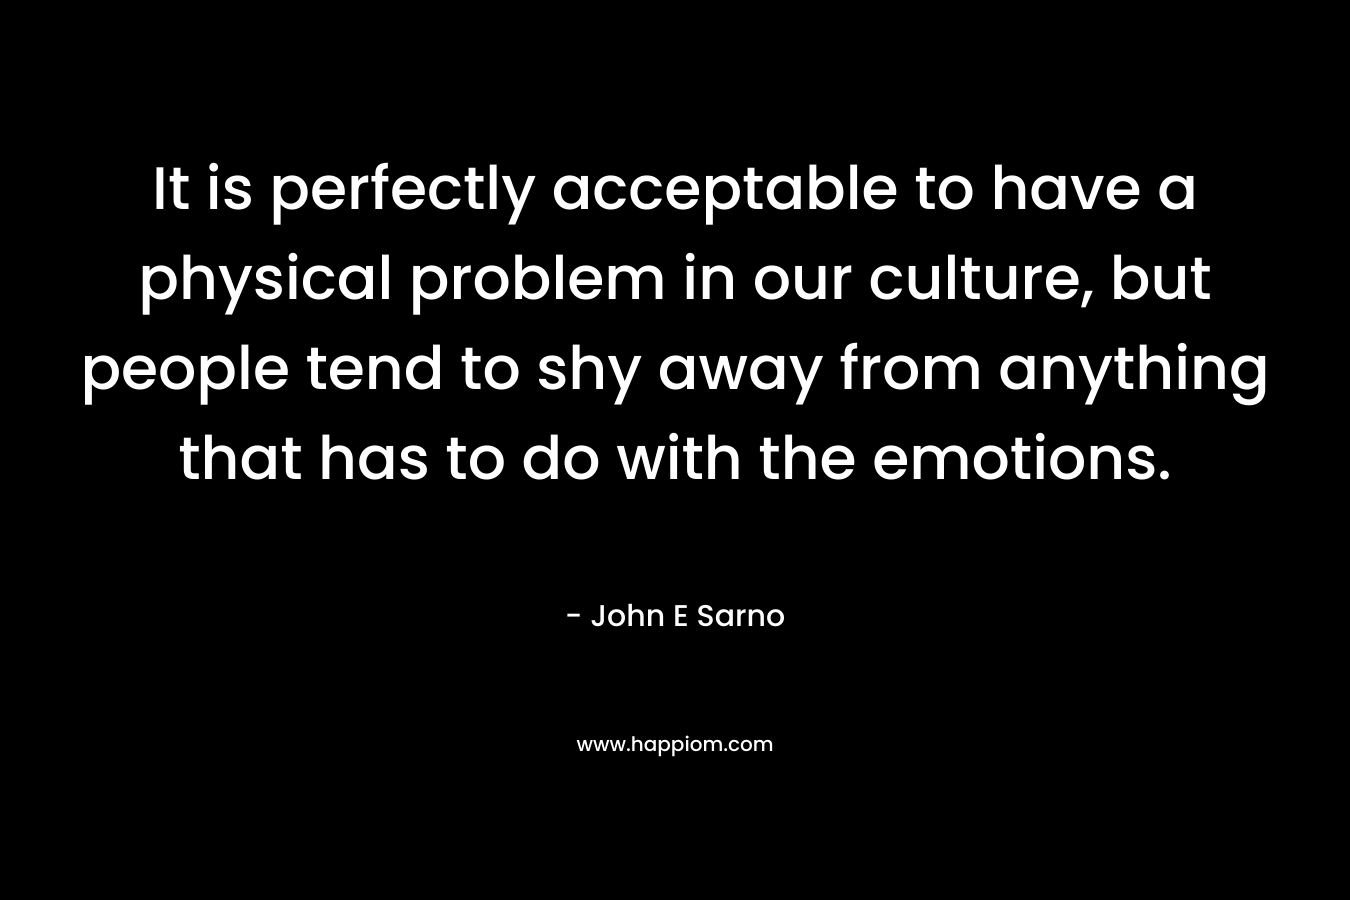 It is perfectly acceptable to have a physical problem in our culture, but people tend to shy away from anything that has to do with the emotions. – John E Sarno